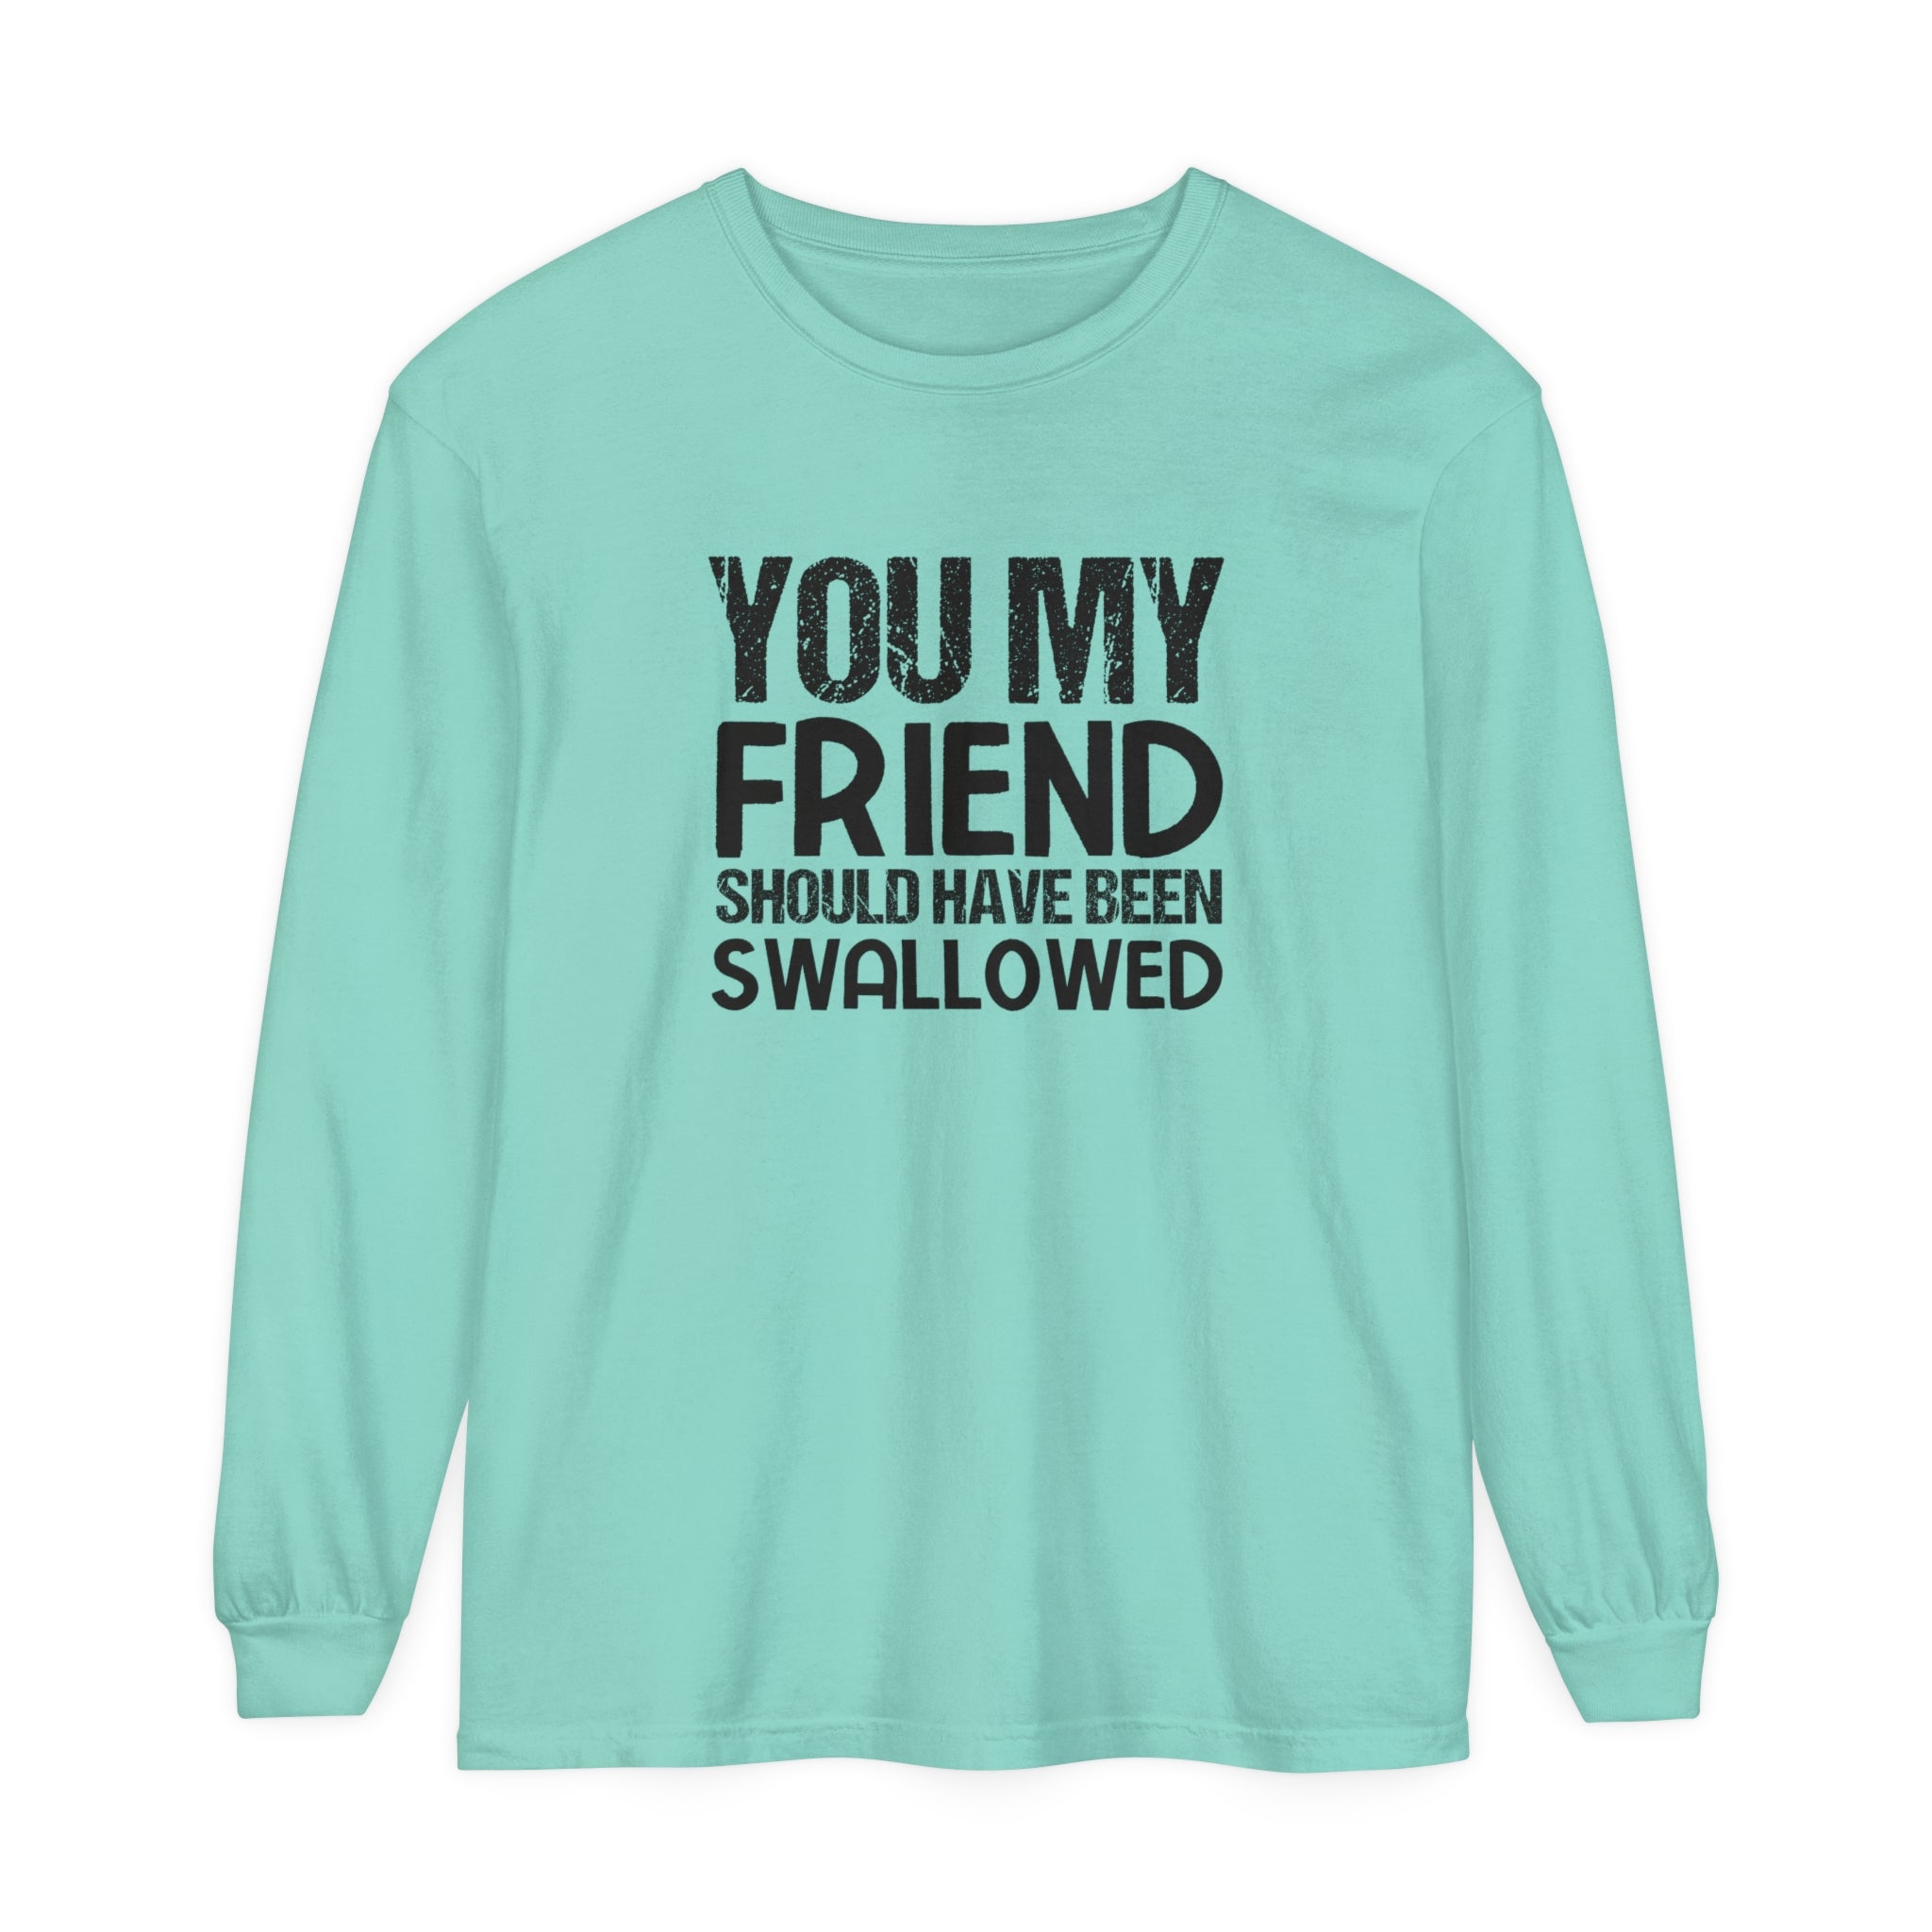 "You, My Friend, Should Have Been Swallowed" Humor-Infused Women's Garment-Dyed Long Sleeve T-Shirt: Edgy, Comical, and Bold Fashion Statement